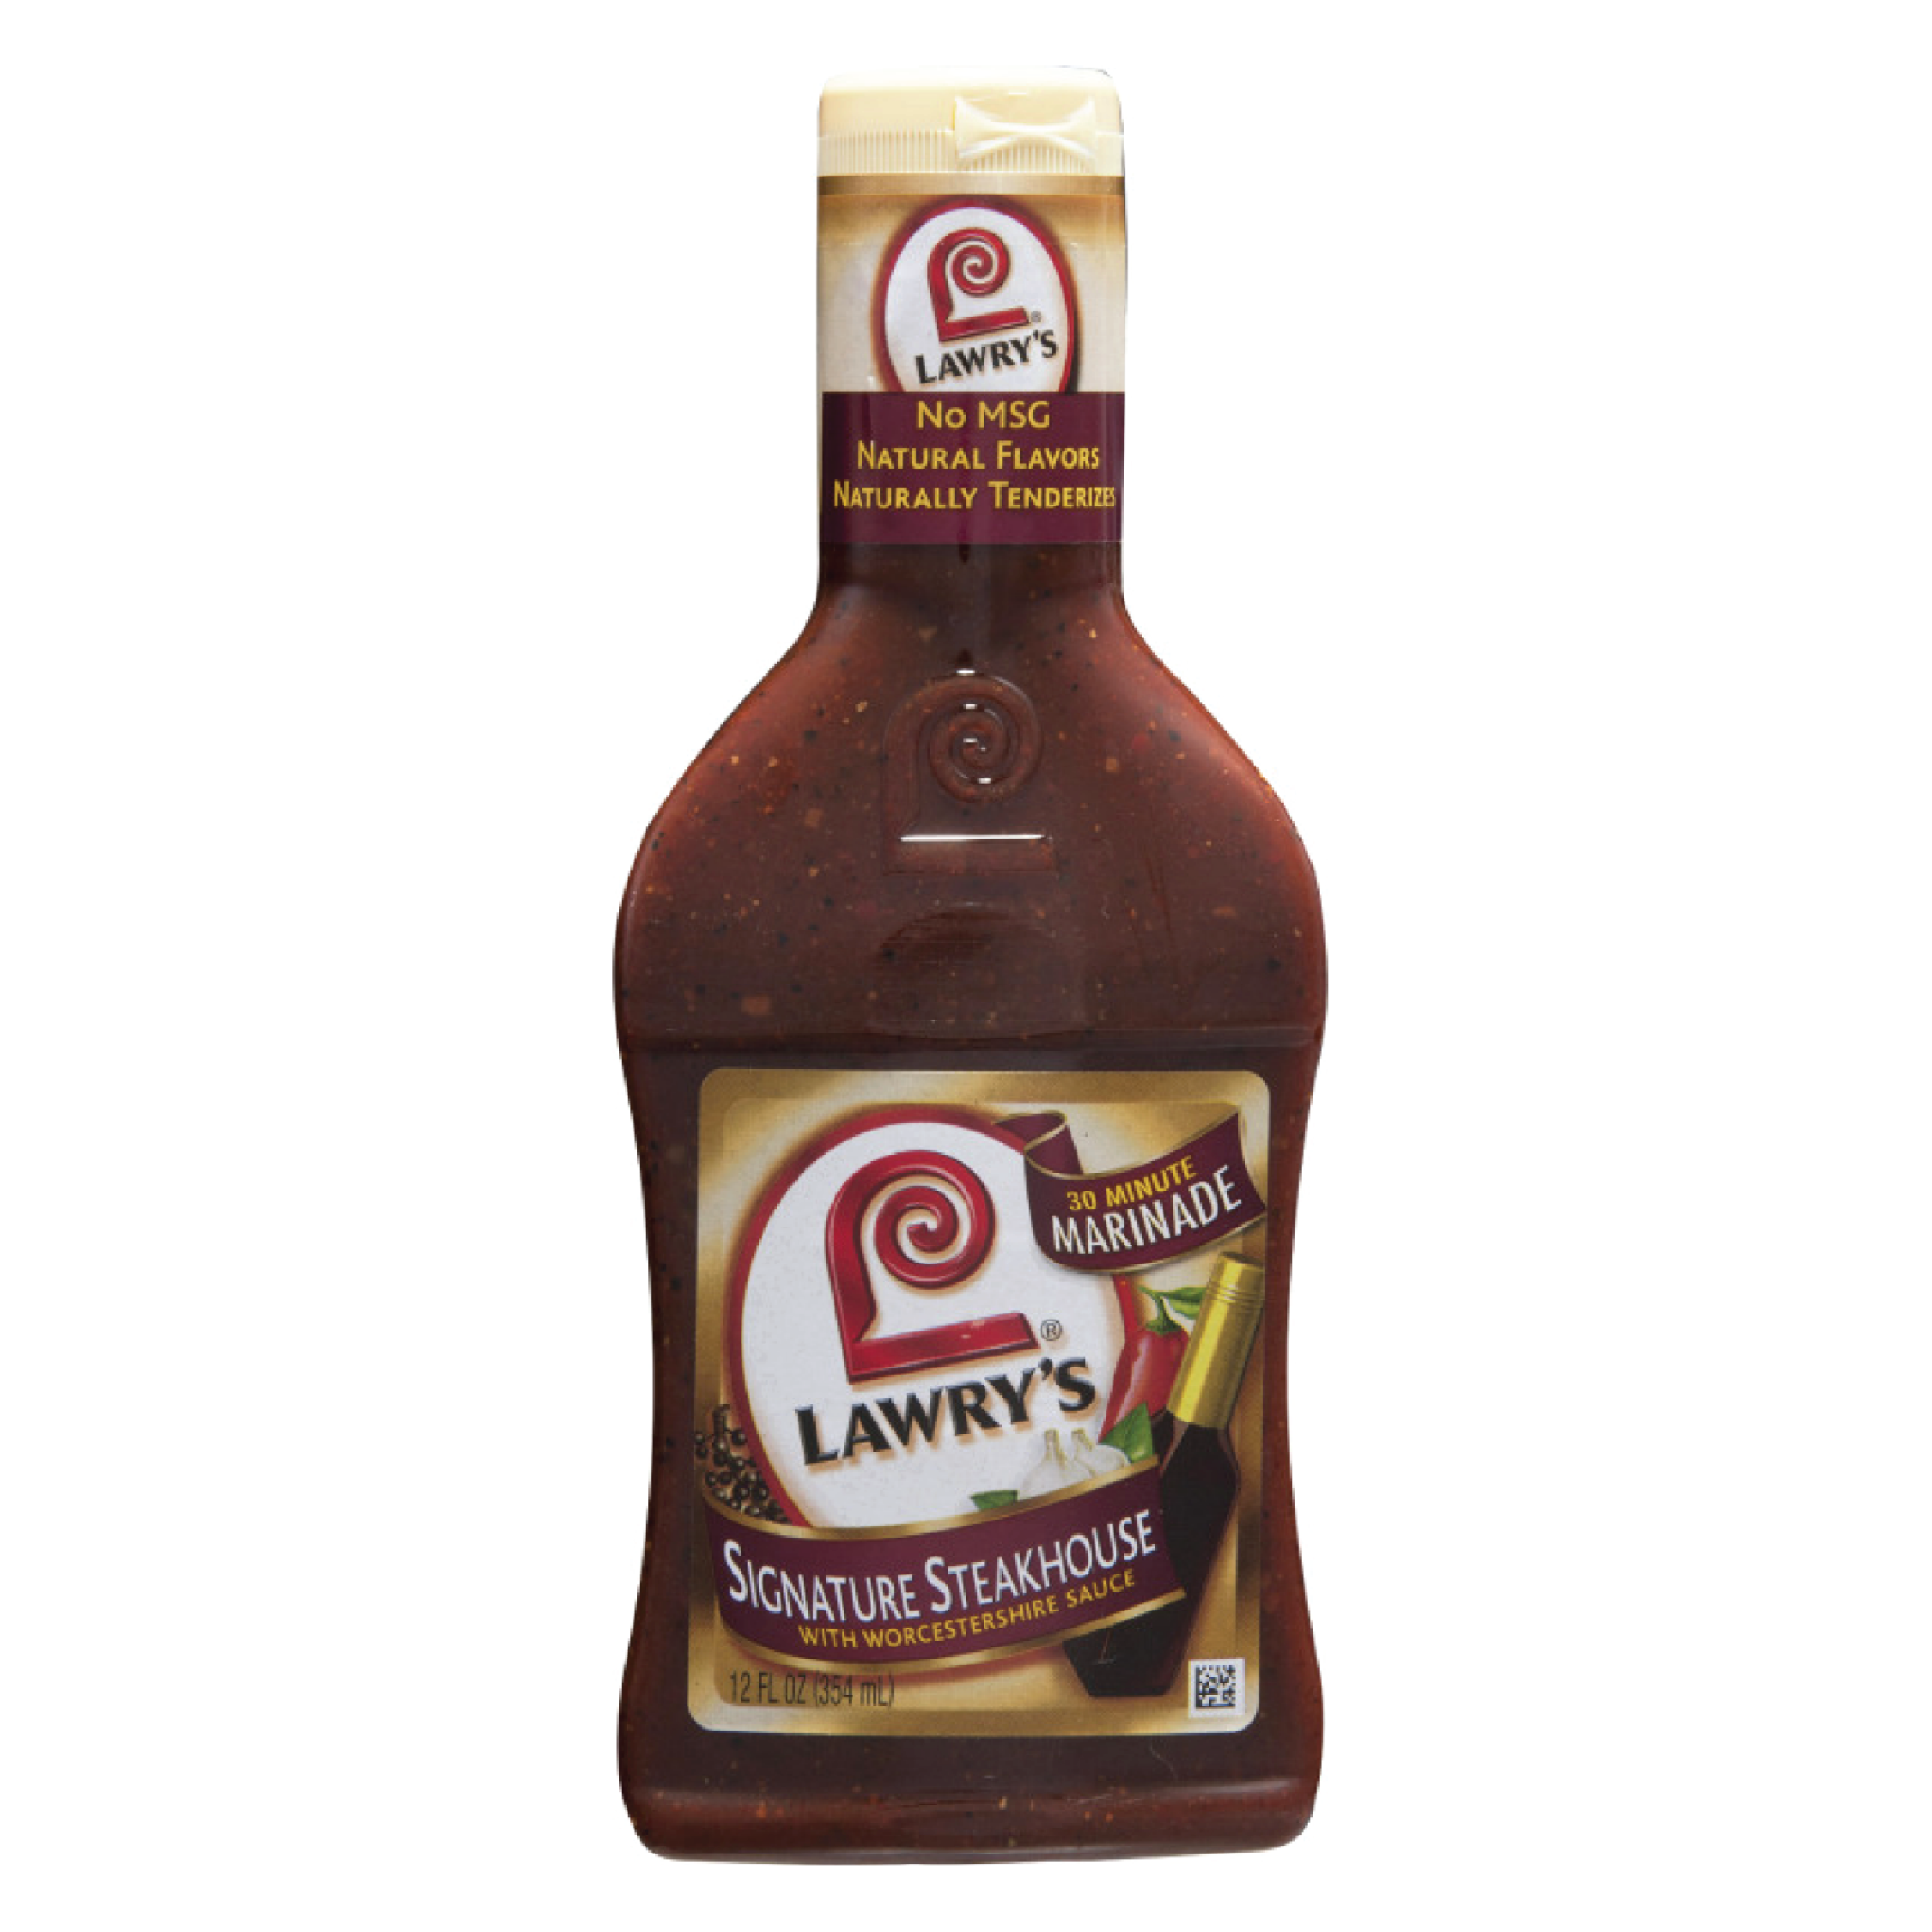 Lawry's Signature Steakhouse Marinade With Worchestershire Sauce 12oz